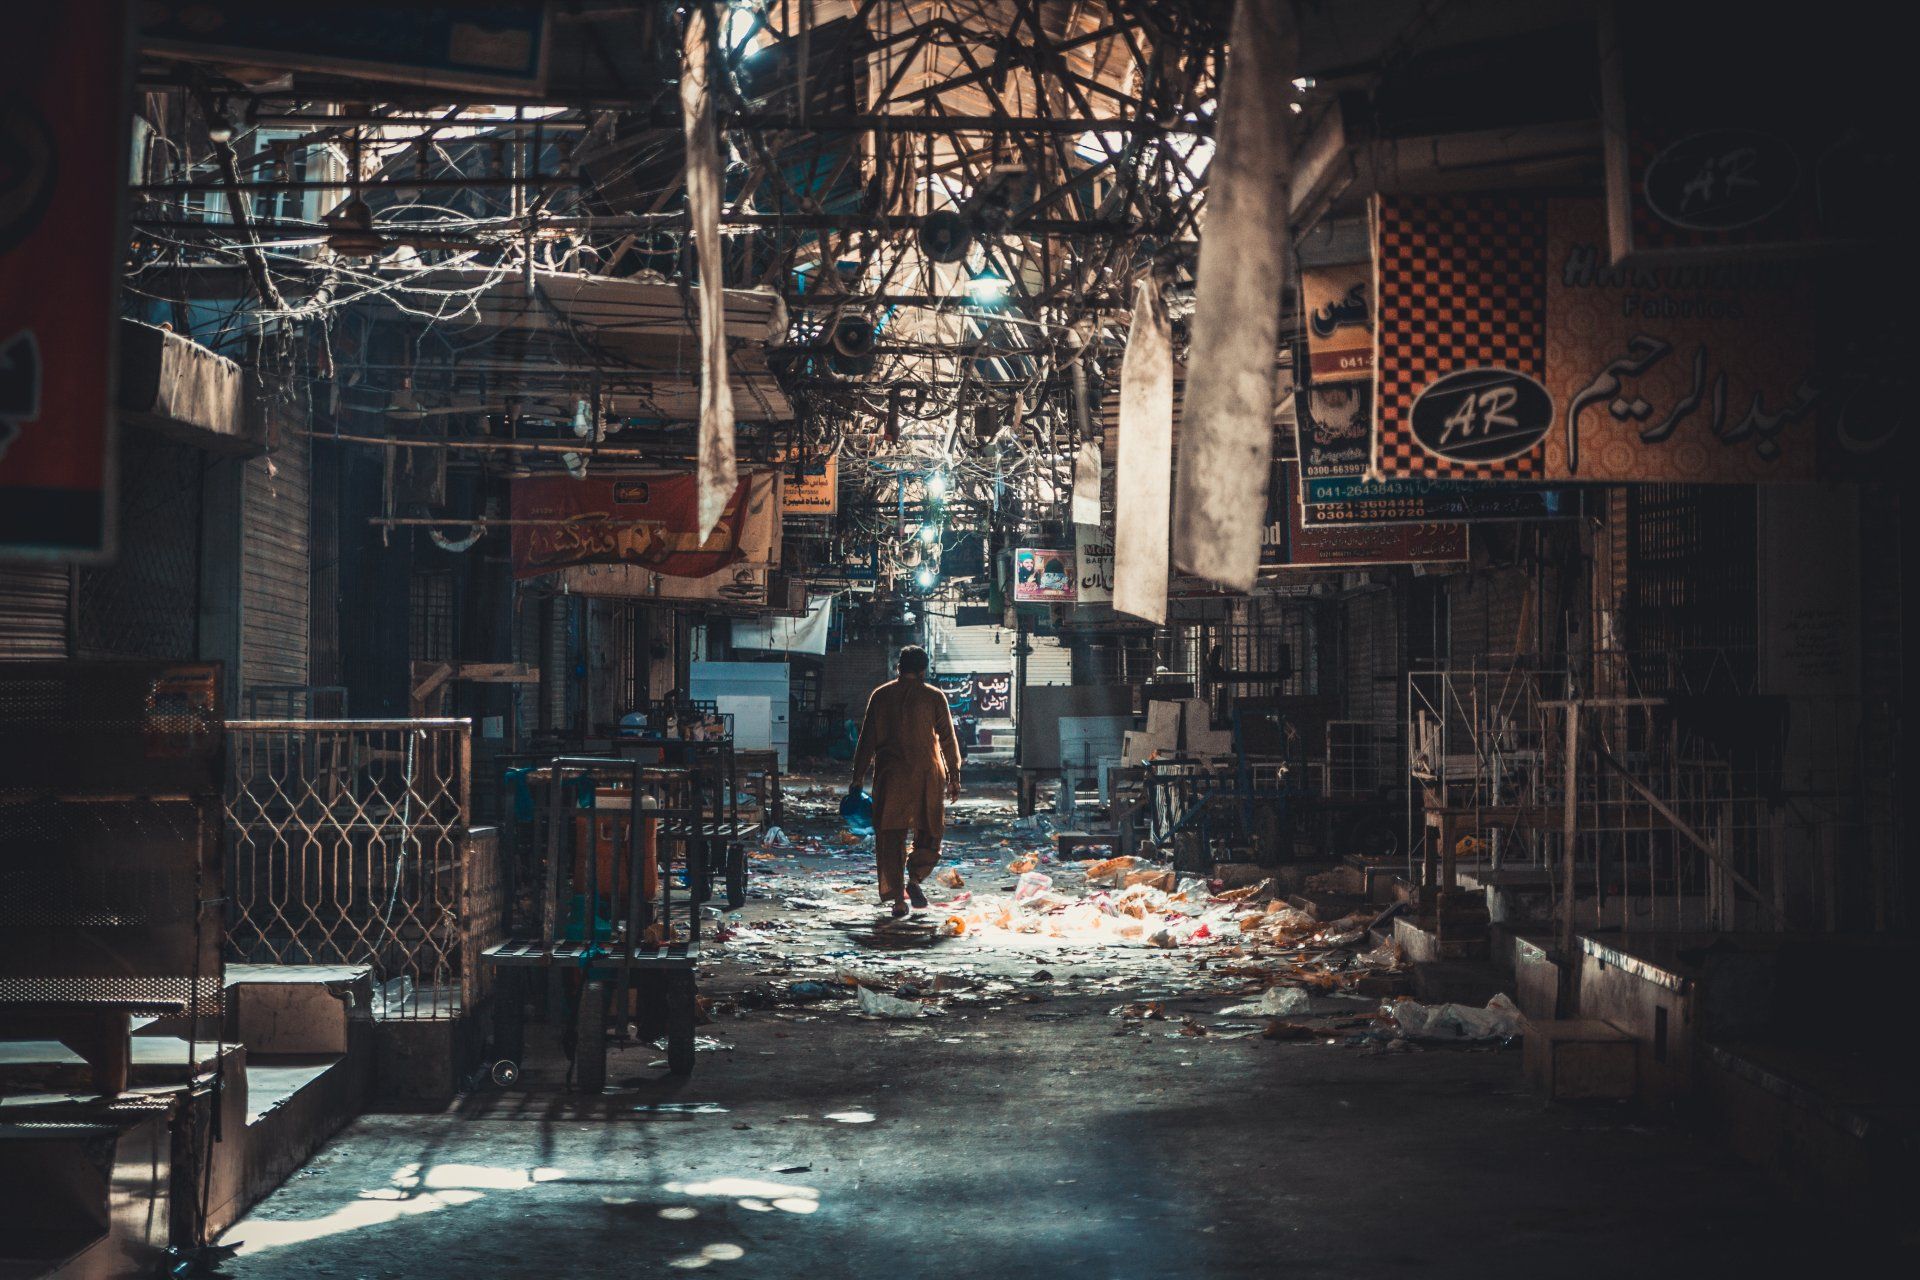 A business area with garbage all over the floors while a worker walks among it